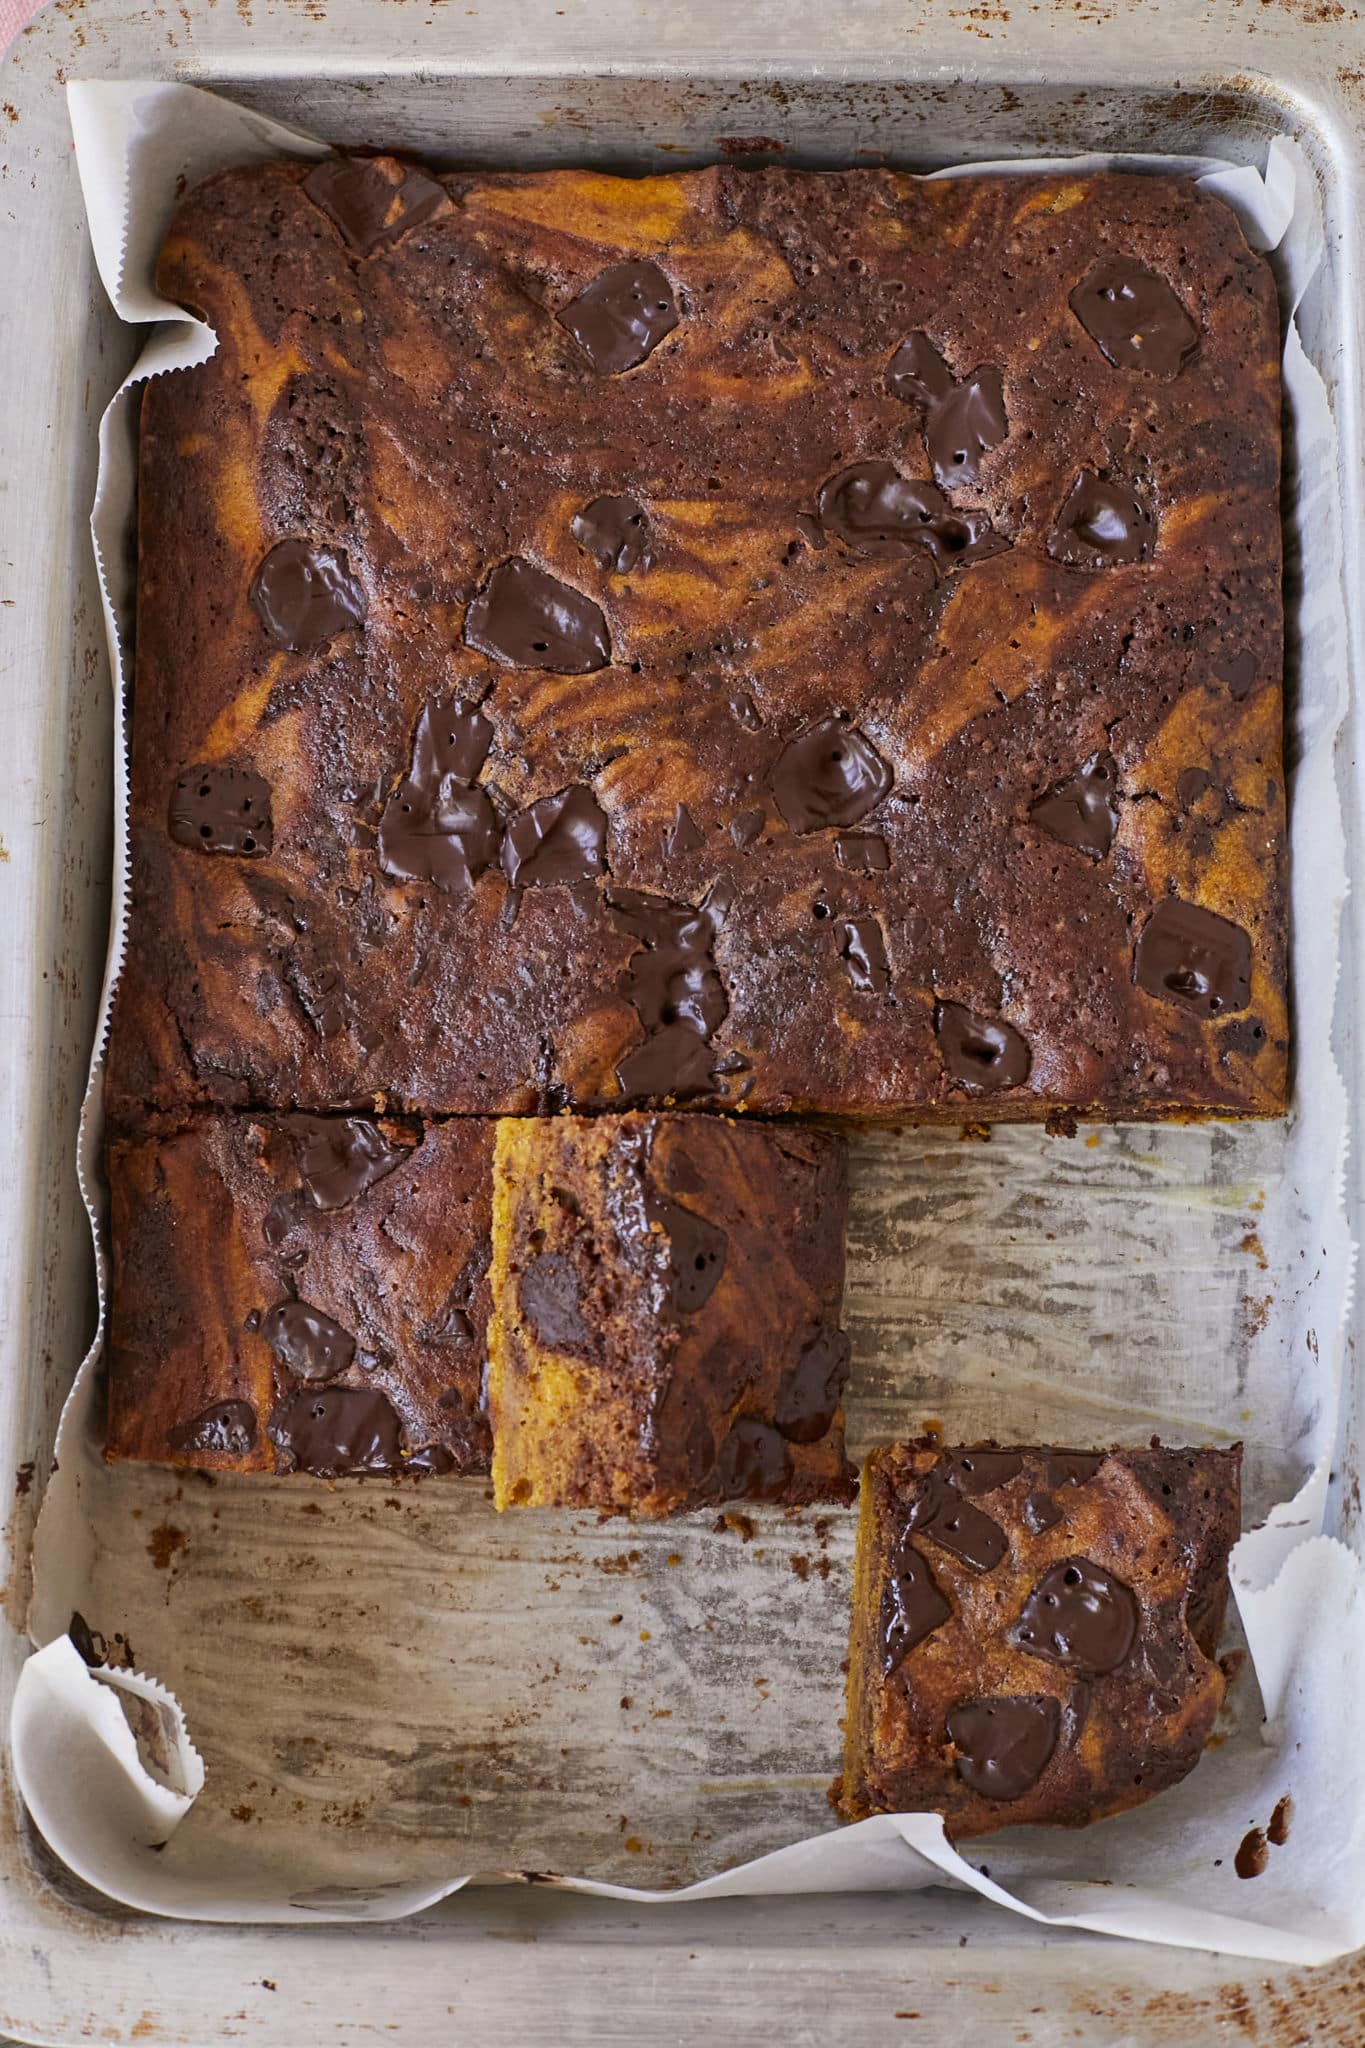 Servings of pumpkin pie brownies are cut from the entire batch with a cross section showing the swirled pumpkin pie.